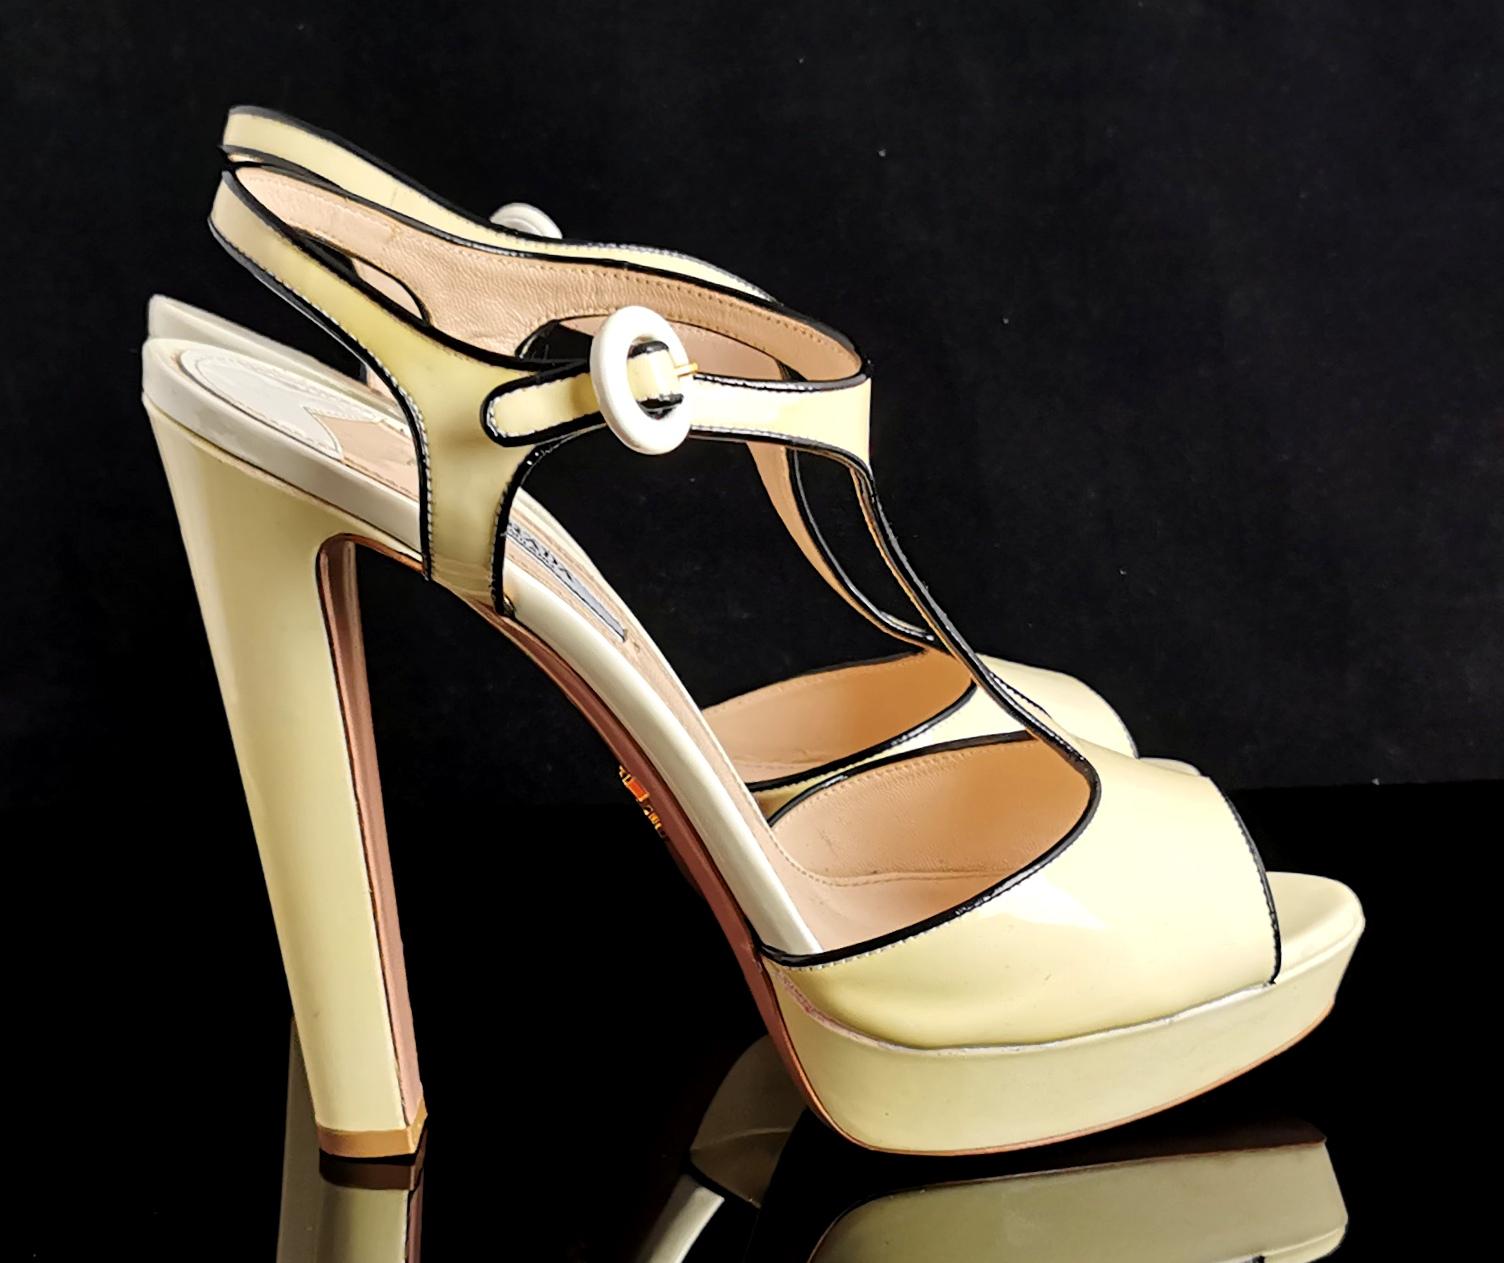 A truly gorgeous pair of Prada patent leather platform heel sandals.

They have a T bar shape with chunky platform soles and sky scraper heels giving the perfect legs forever look whether worn with your favourite jeans or dressed up for an evening